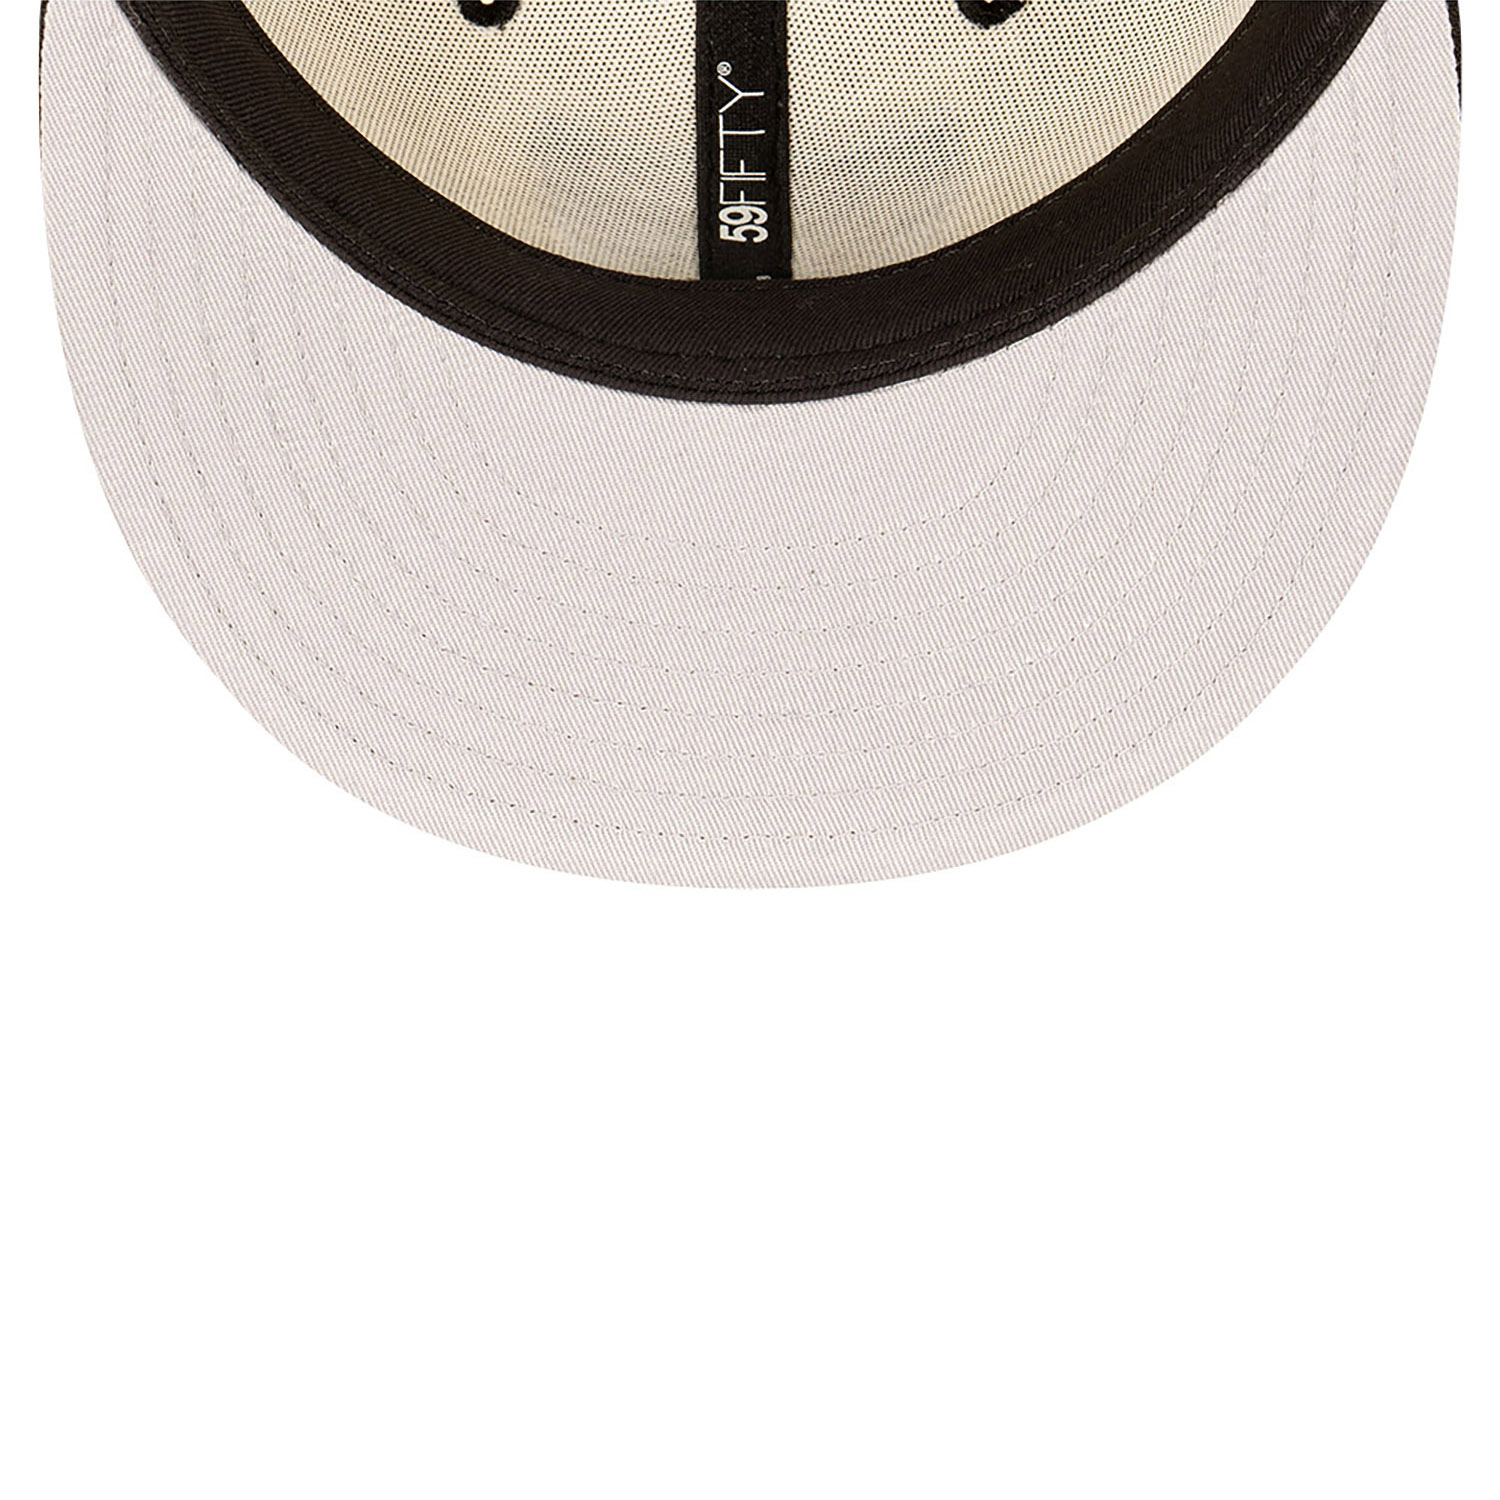 Las Vegas Raiders Pack Logo Chrome White 59FIFTY Fitted Cap